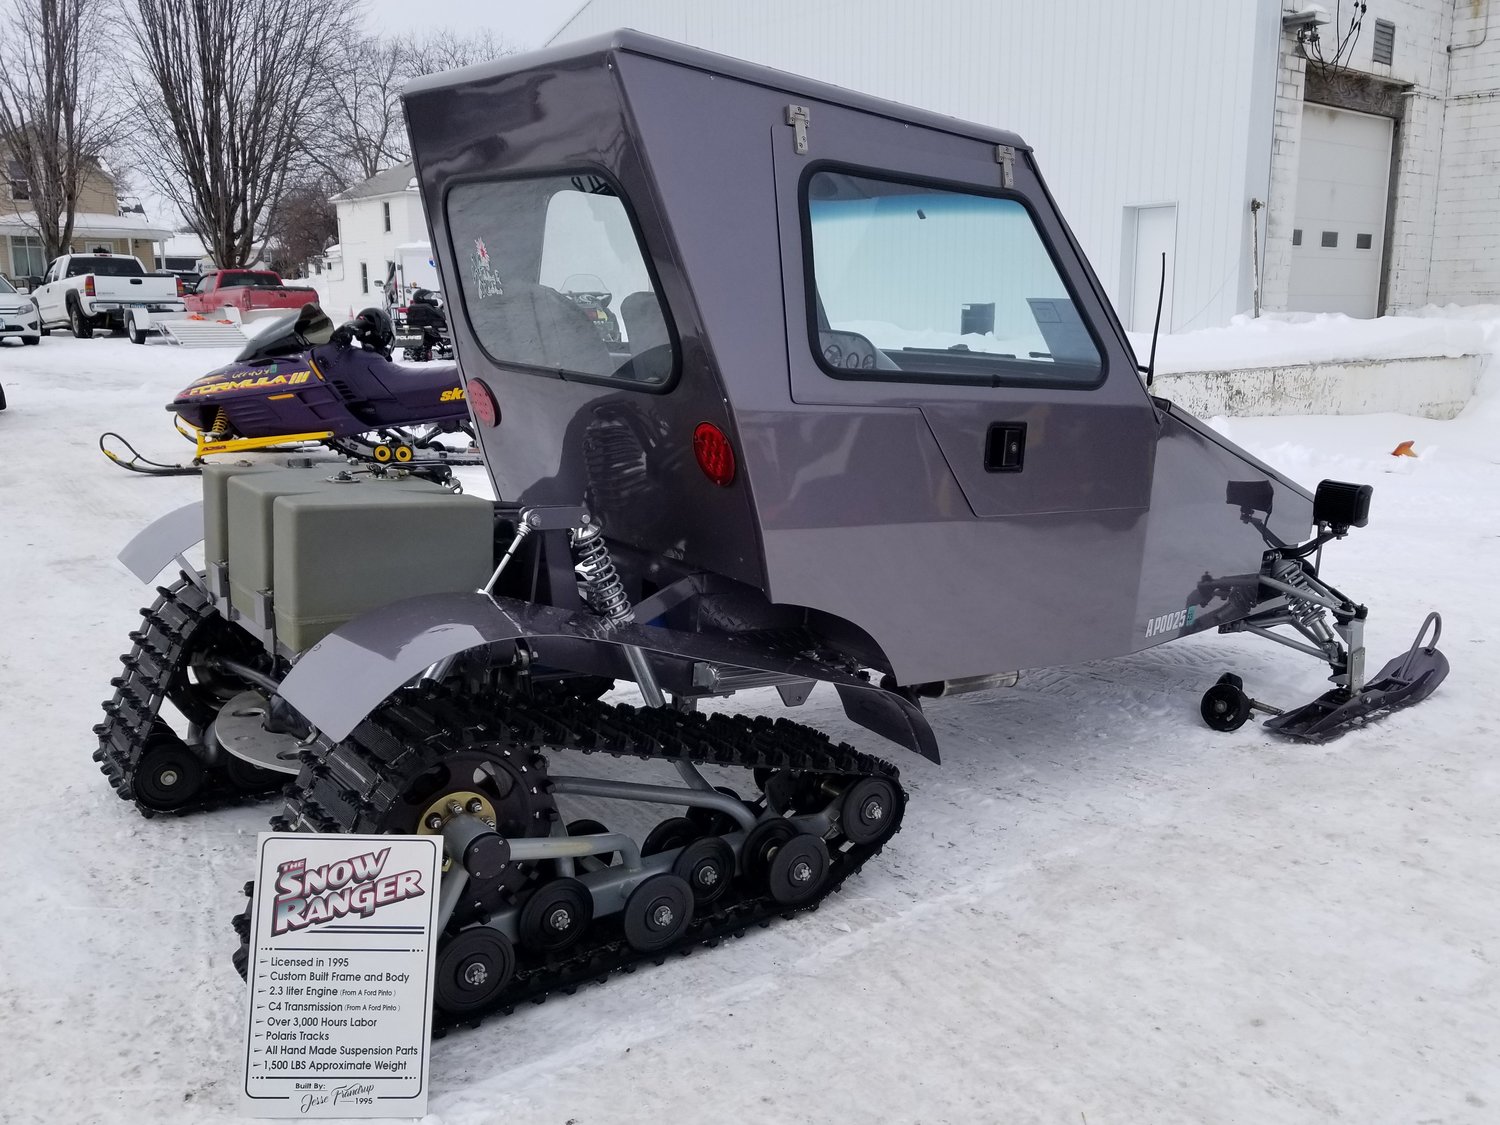 Winner of the "Off The Wall" award went to this Snow Ranger, homemade by Jesse Frandrup.